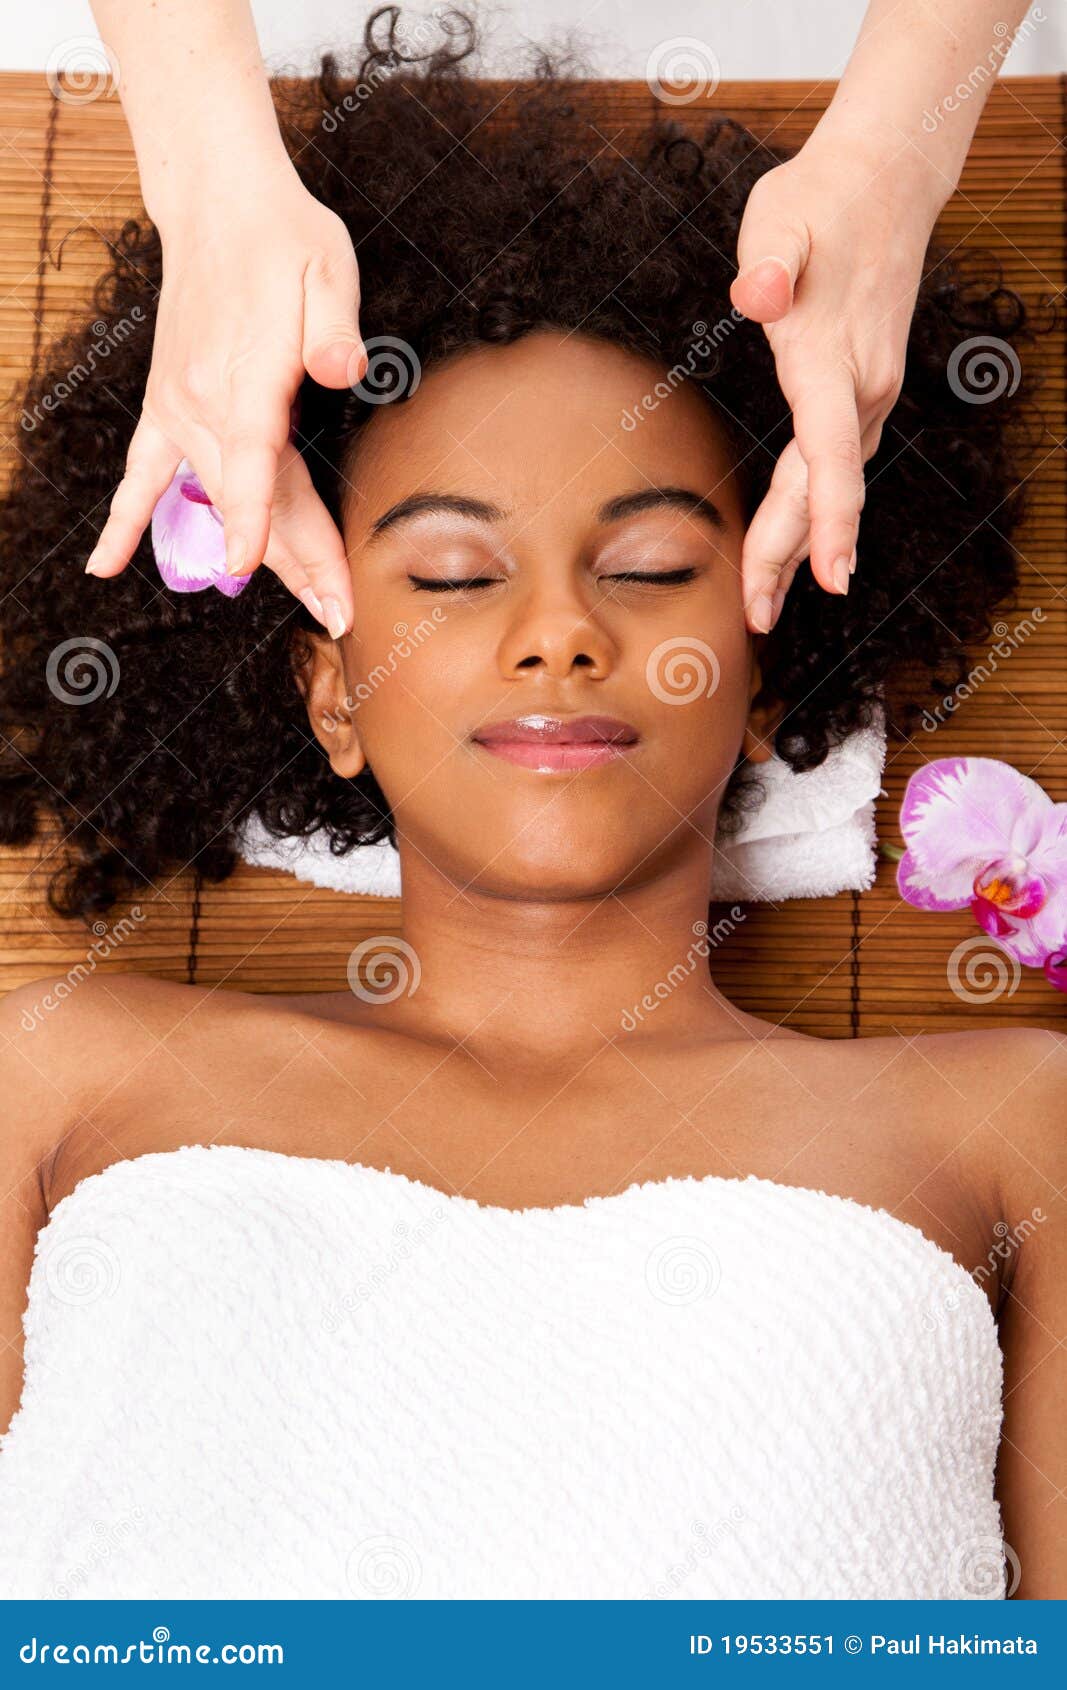 Facial Temple Massage In Beauty Spa Stock Image Image 19533551